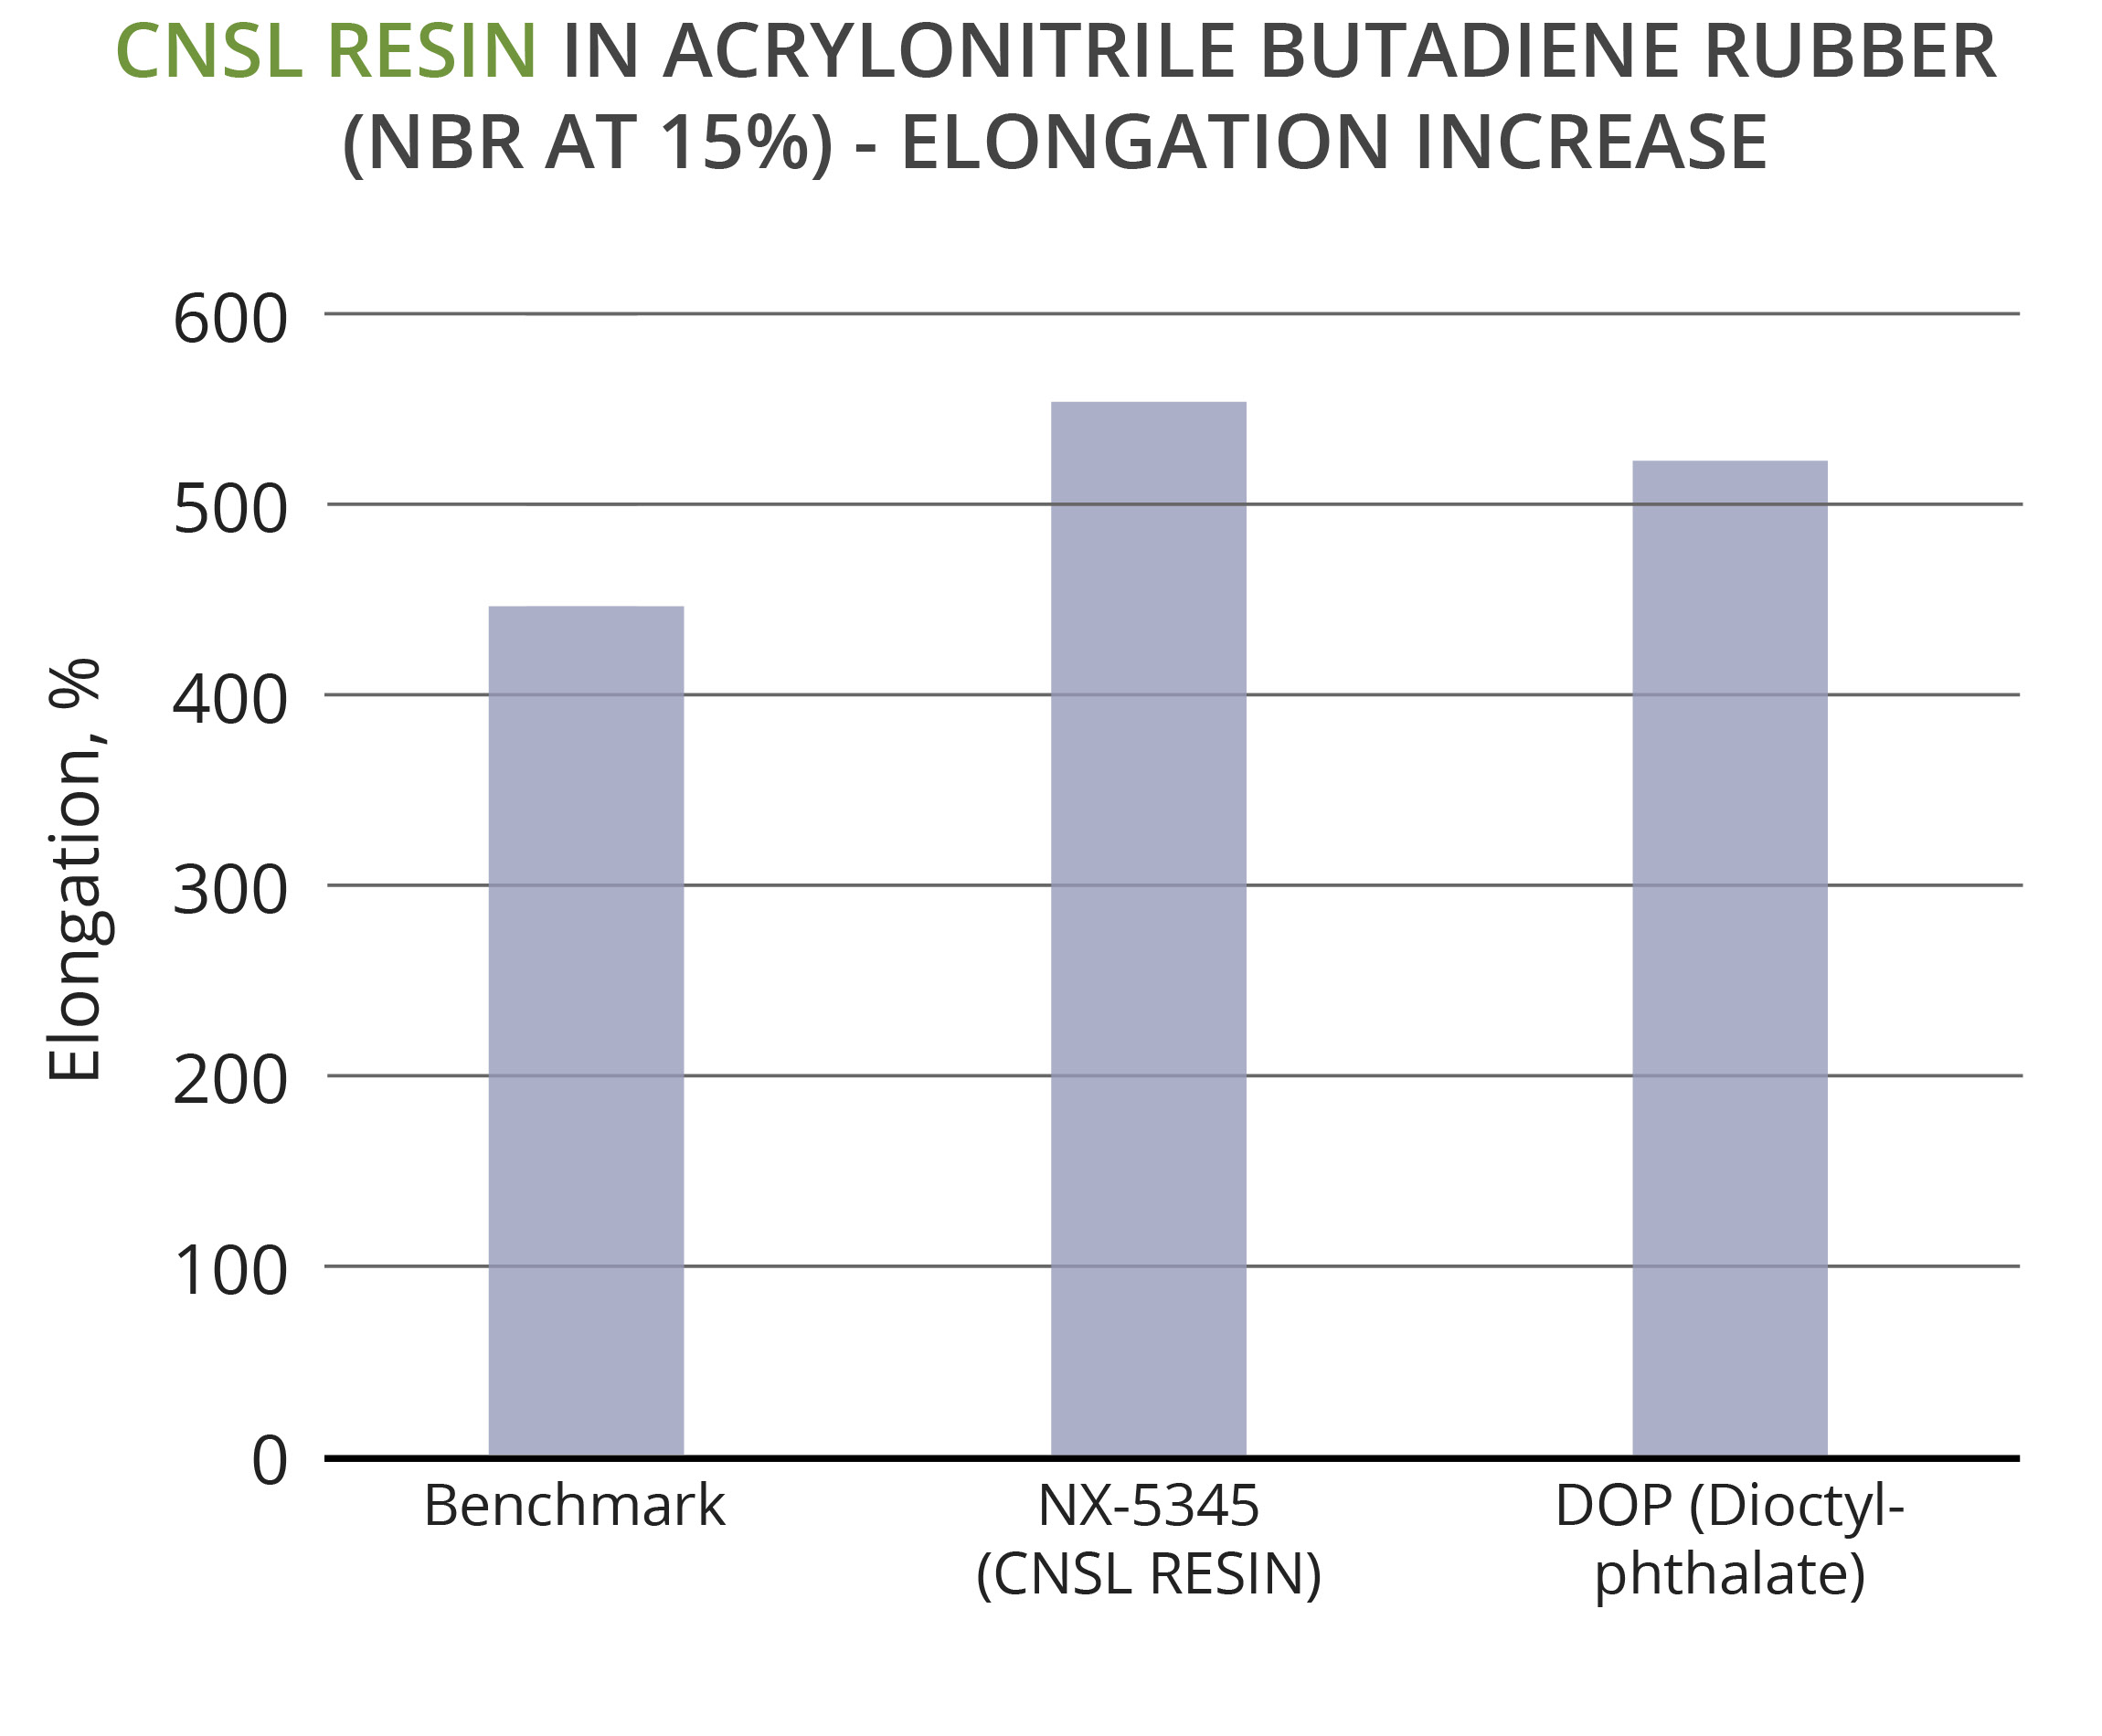 CNSL Resins can be used as plasticizers in nitrile rubber to also increase elongation